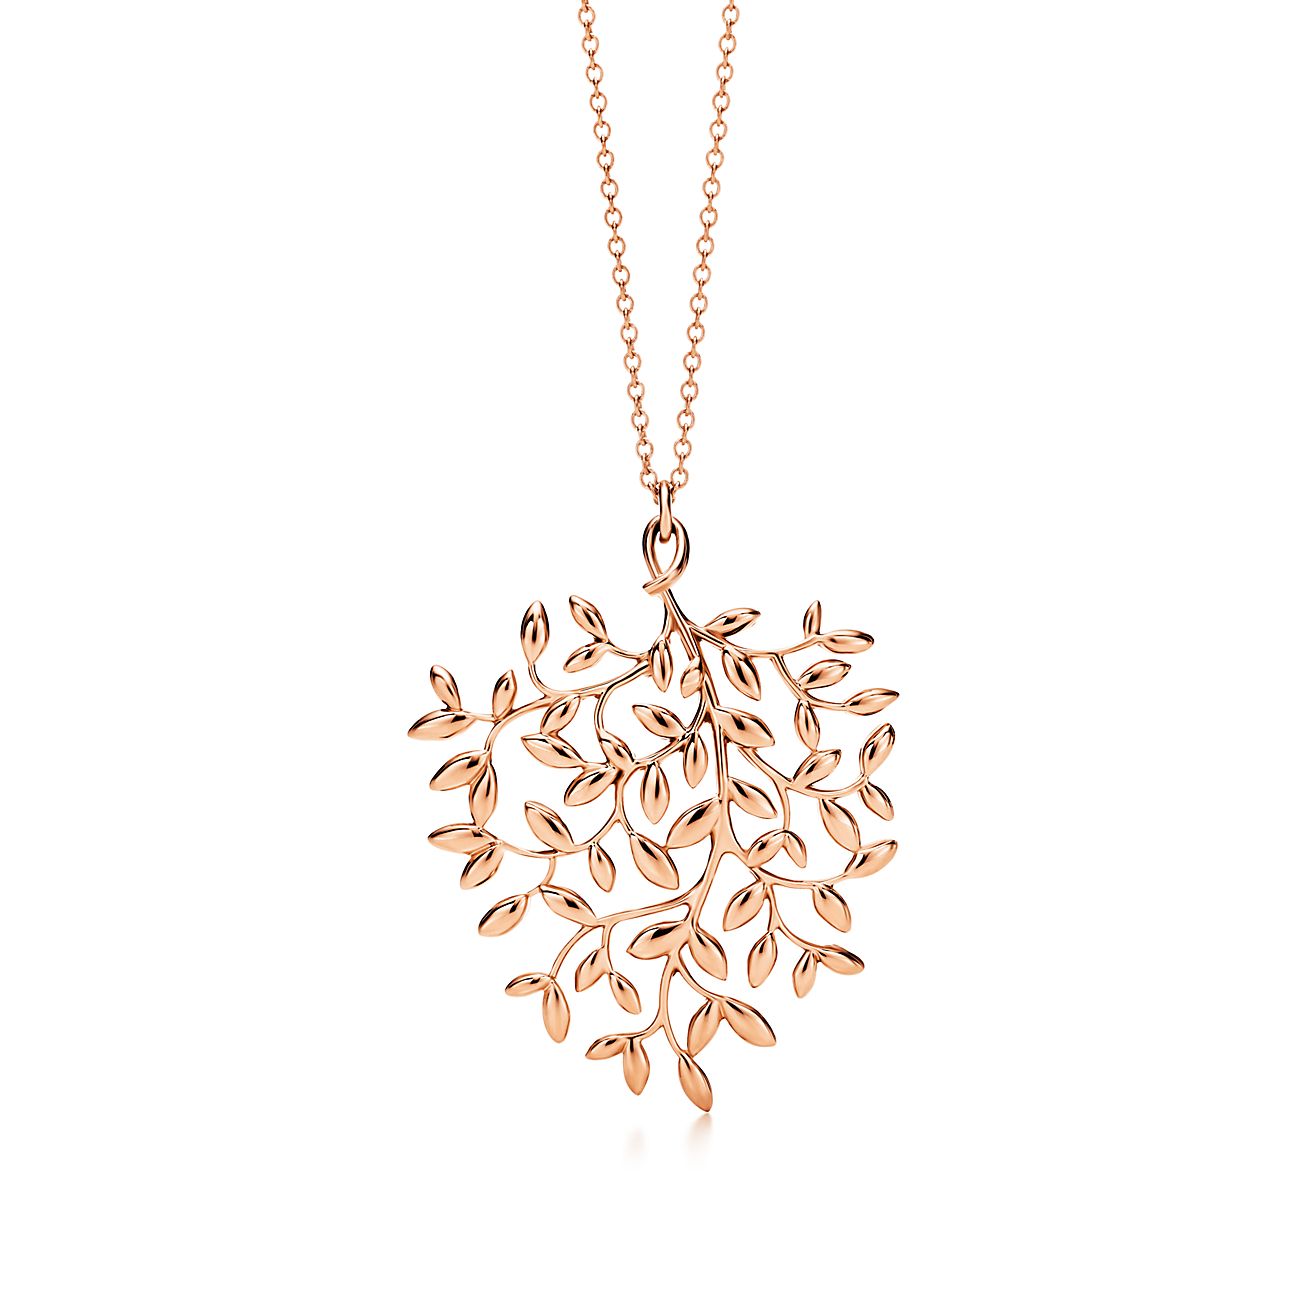 Paloma Picasso® Olive Leaf pendant in 